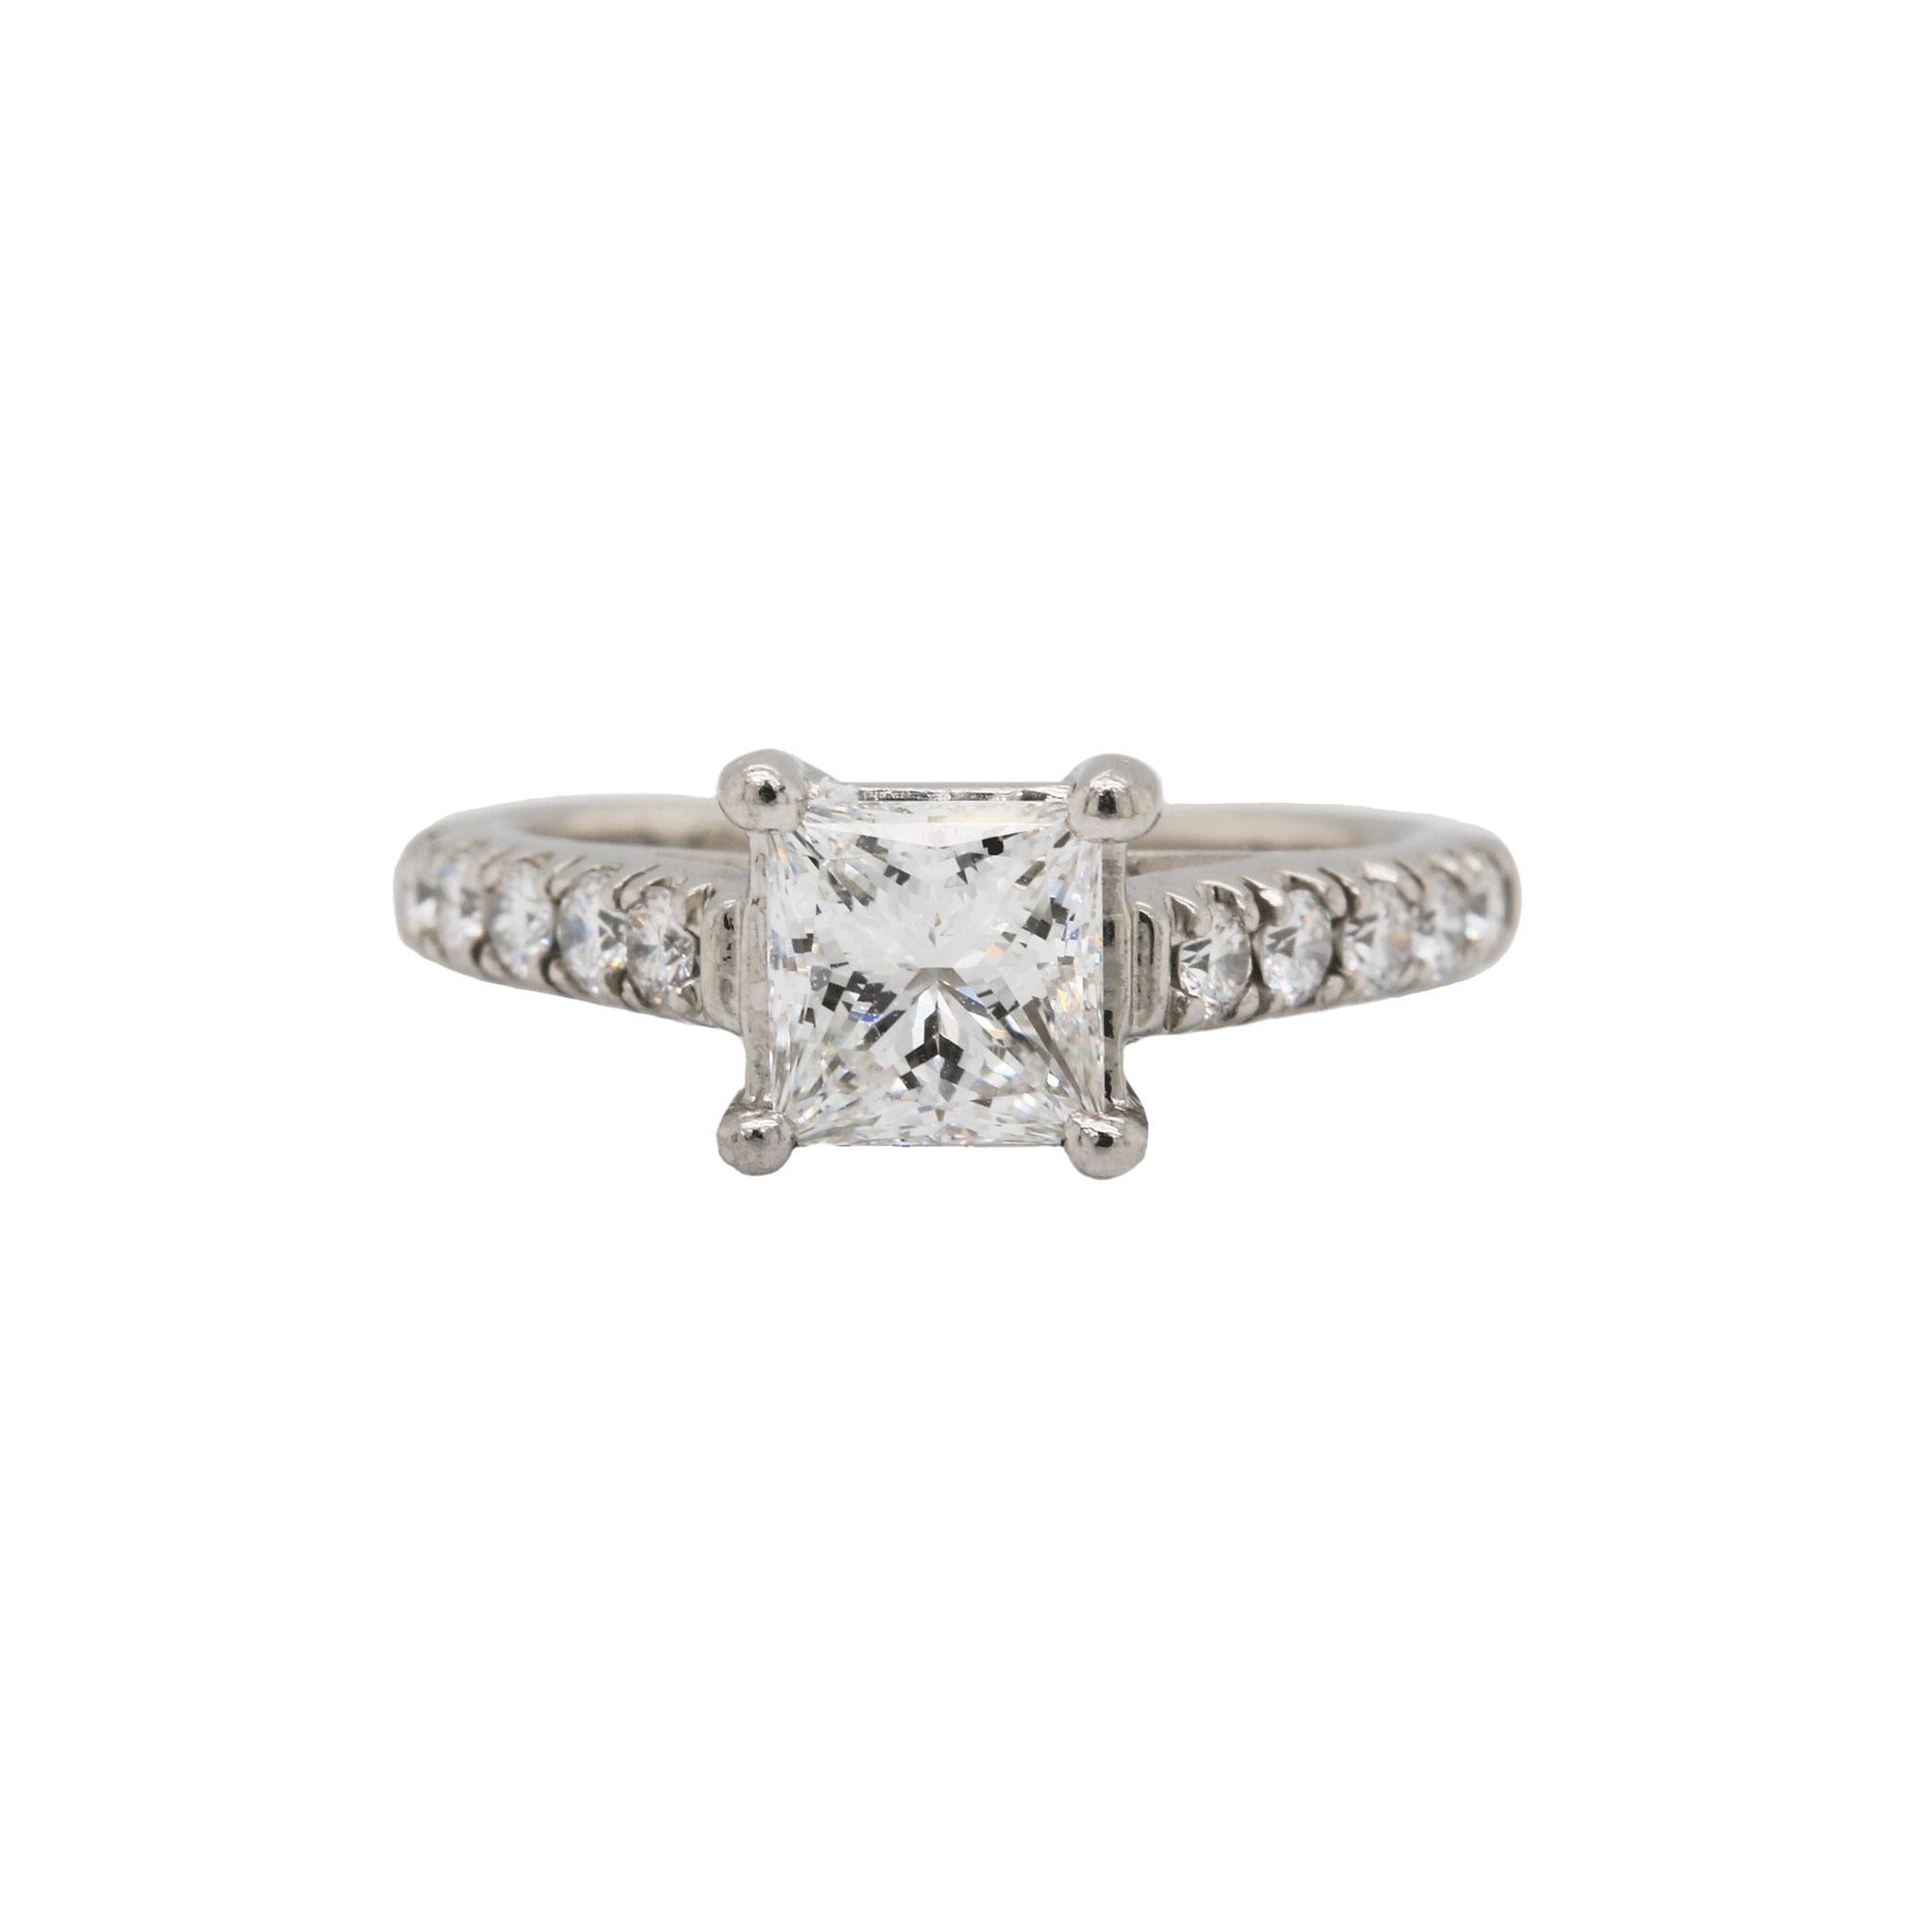 This elegant estate ring features a 1.07ct G - VVS2 center princess cut diamond in a four prong setting in gleaming platinum. This ring is accented with round brilliant diamonds along the band for extra glamour. This piece comes with a GIA